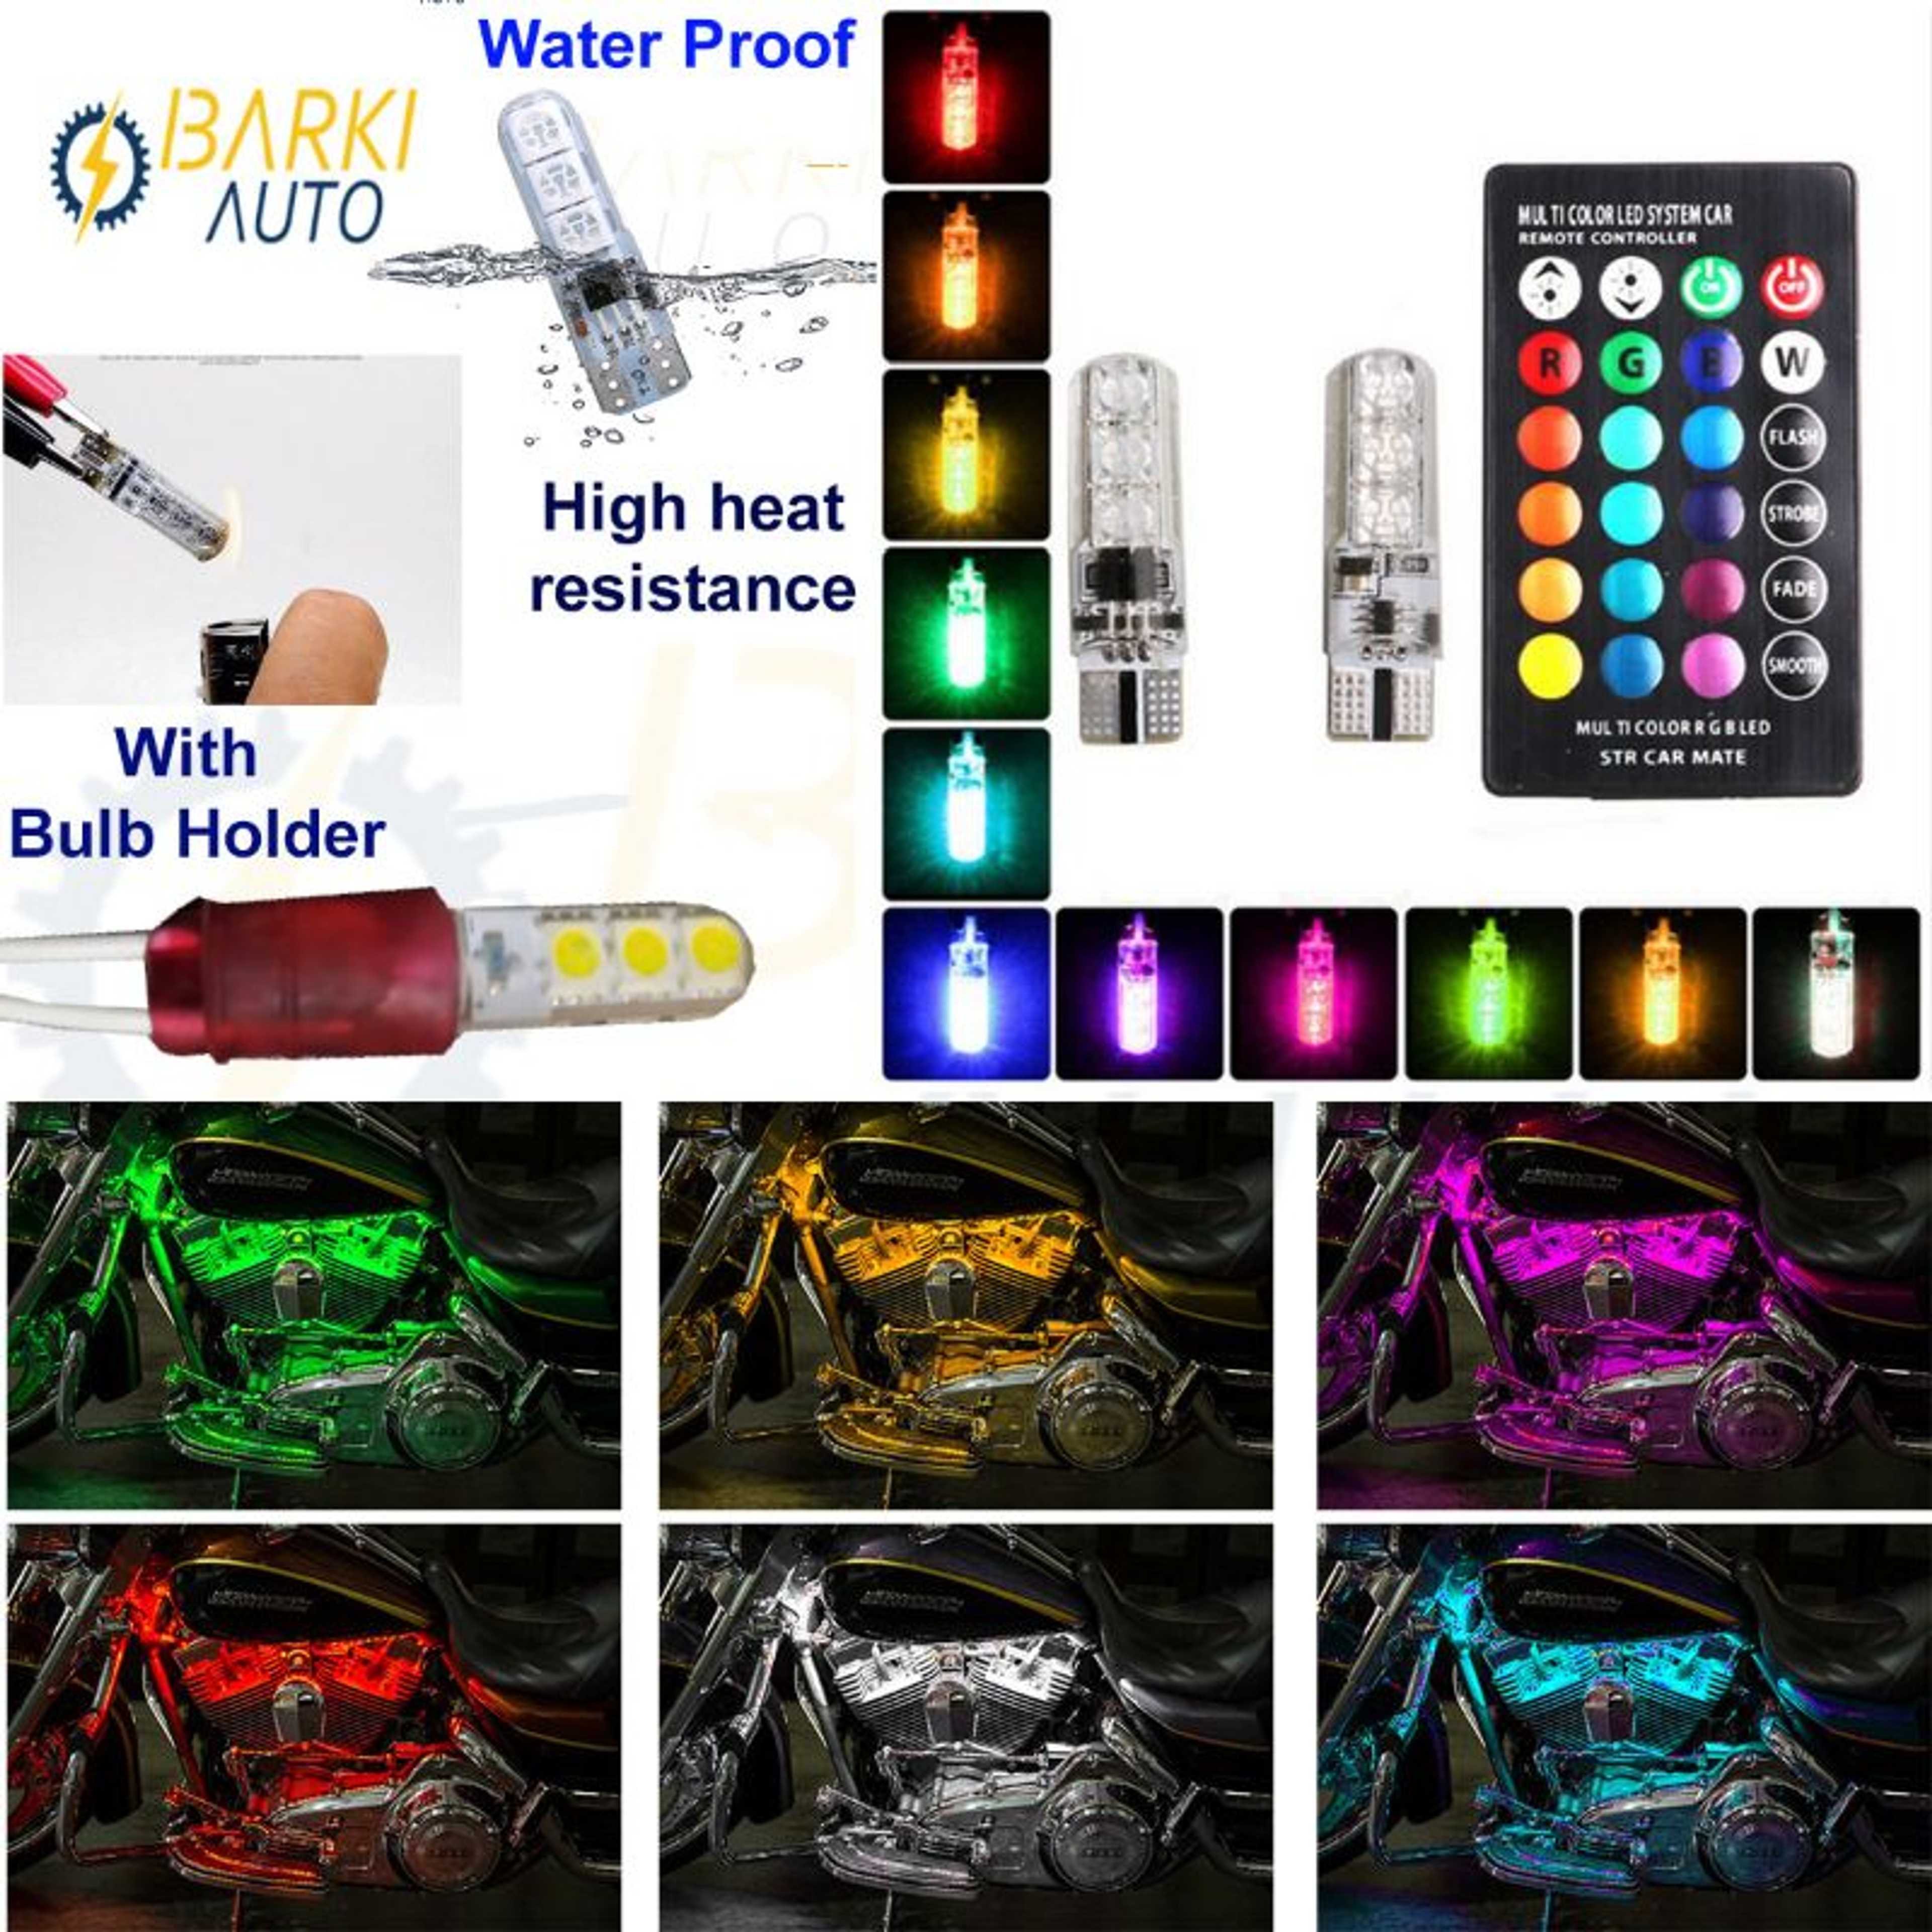 Bike Multi Color/Functions fuel Tank/Engine led light WIRELESS Remote multi color with flasher with bulb holder